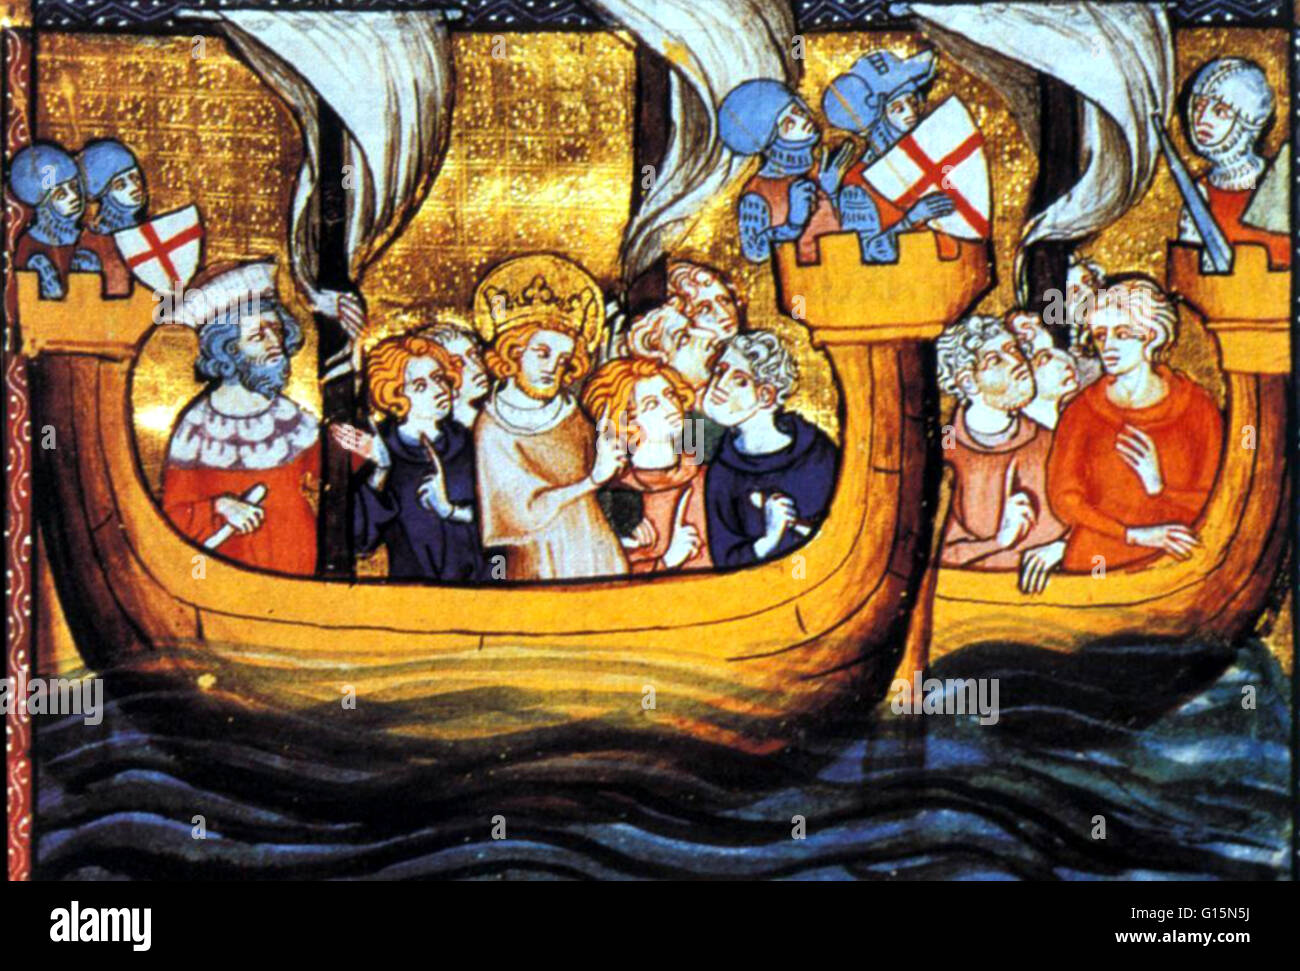 Louis IX en route from Aigues-Mortes to Egypt. The Seventh Crusade (1248 to 1254) was disastrously led by Louis IX of France, a reaction to the loss of Jerusalem (1244) to the Moslems for the final time. The crusade was aimed at Egypt, the main Muslim pow Stock Photo